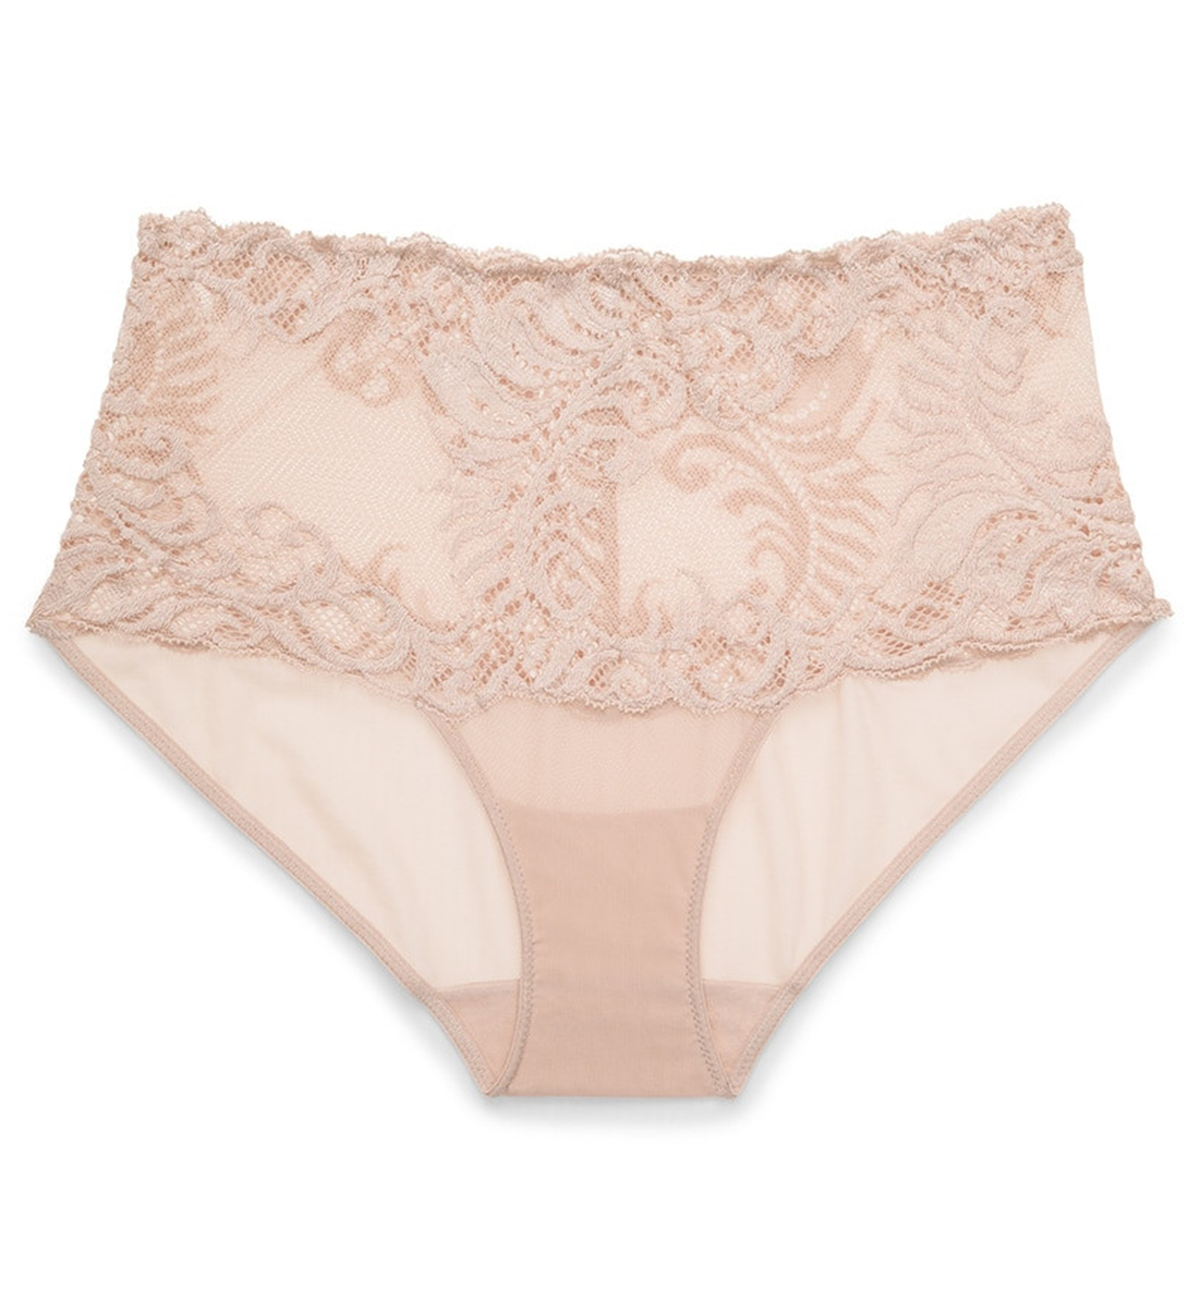 Natori Bliss Girl Brief Panty (756023),Small,Cafe - Cafe,Small